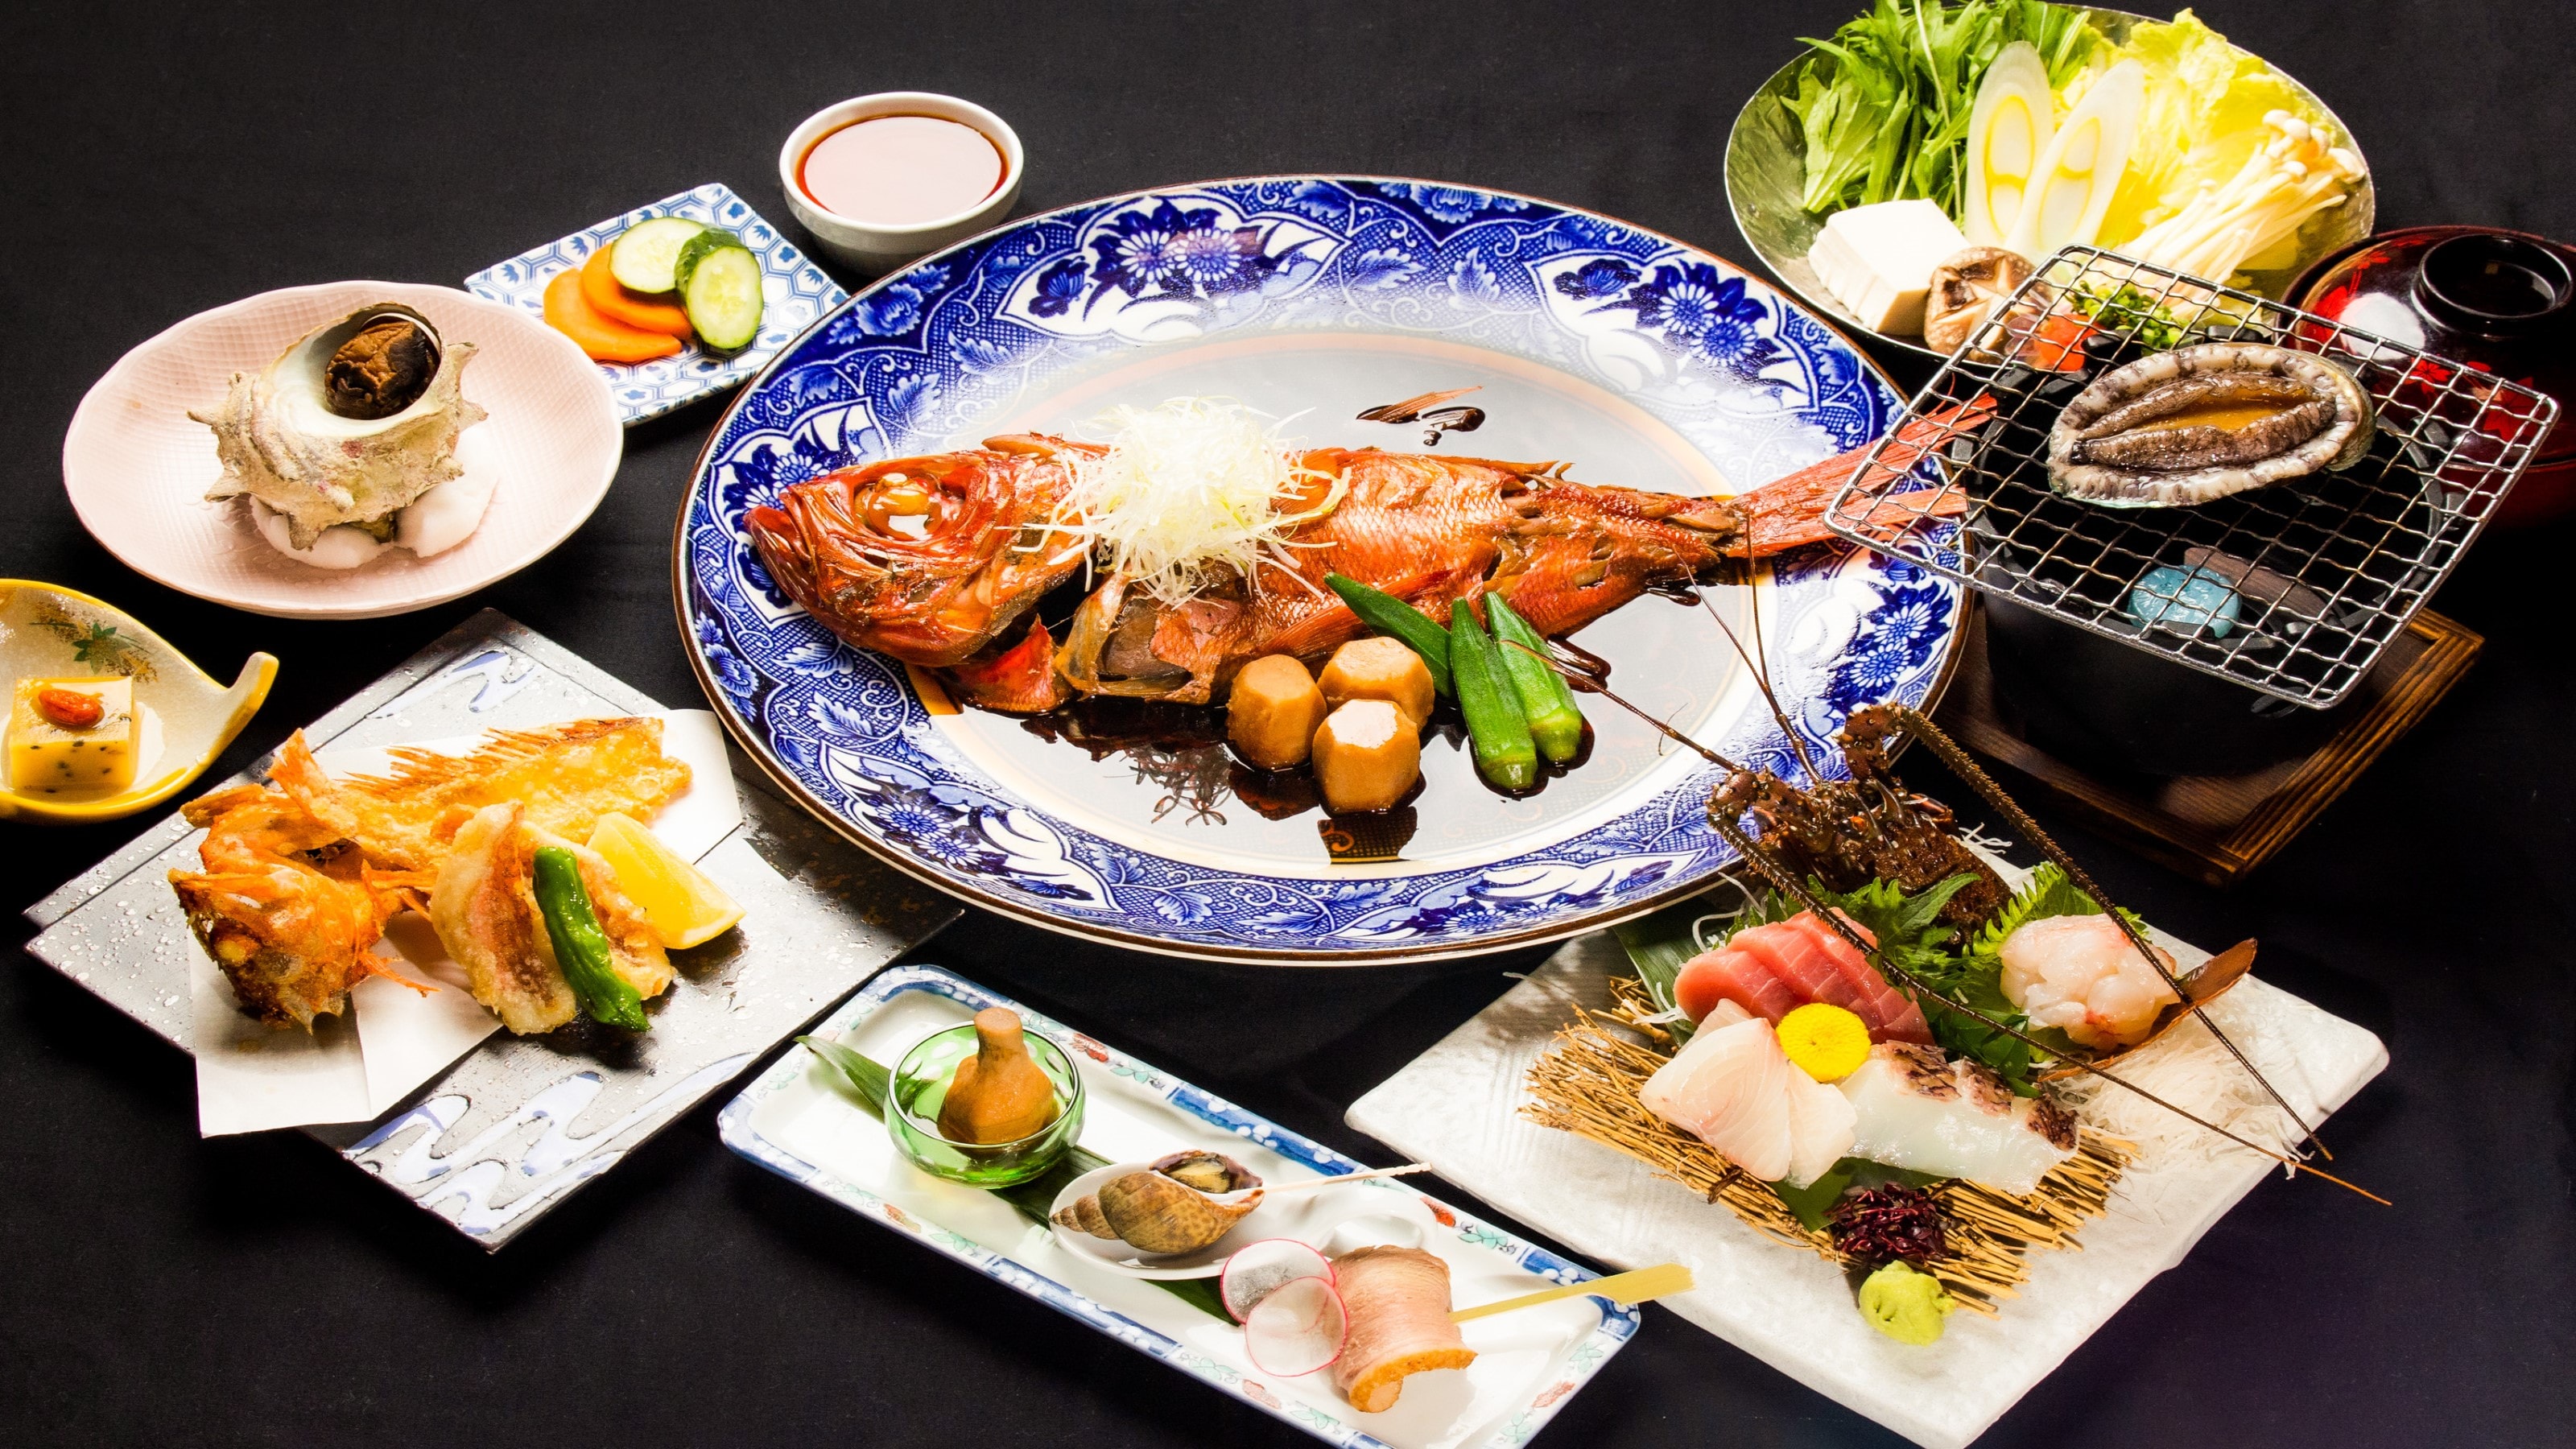 [Five great tastes of seafood] Enjoy a luxurious kaiseki meal such as sea bream, abalone, spiny lobster, turban shell, and scorpion fish.